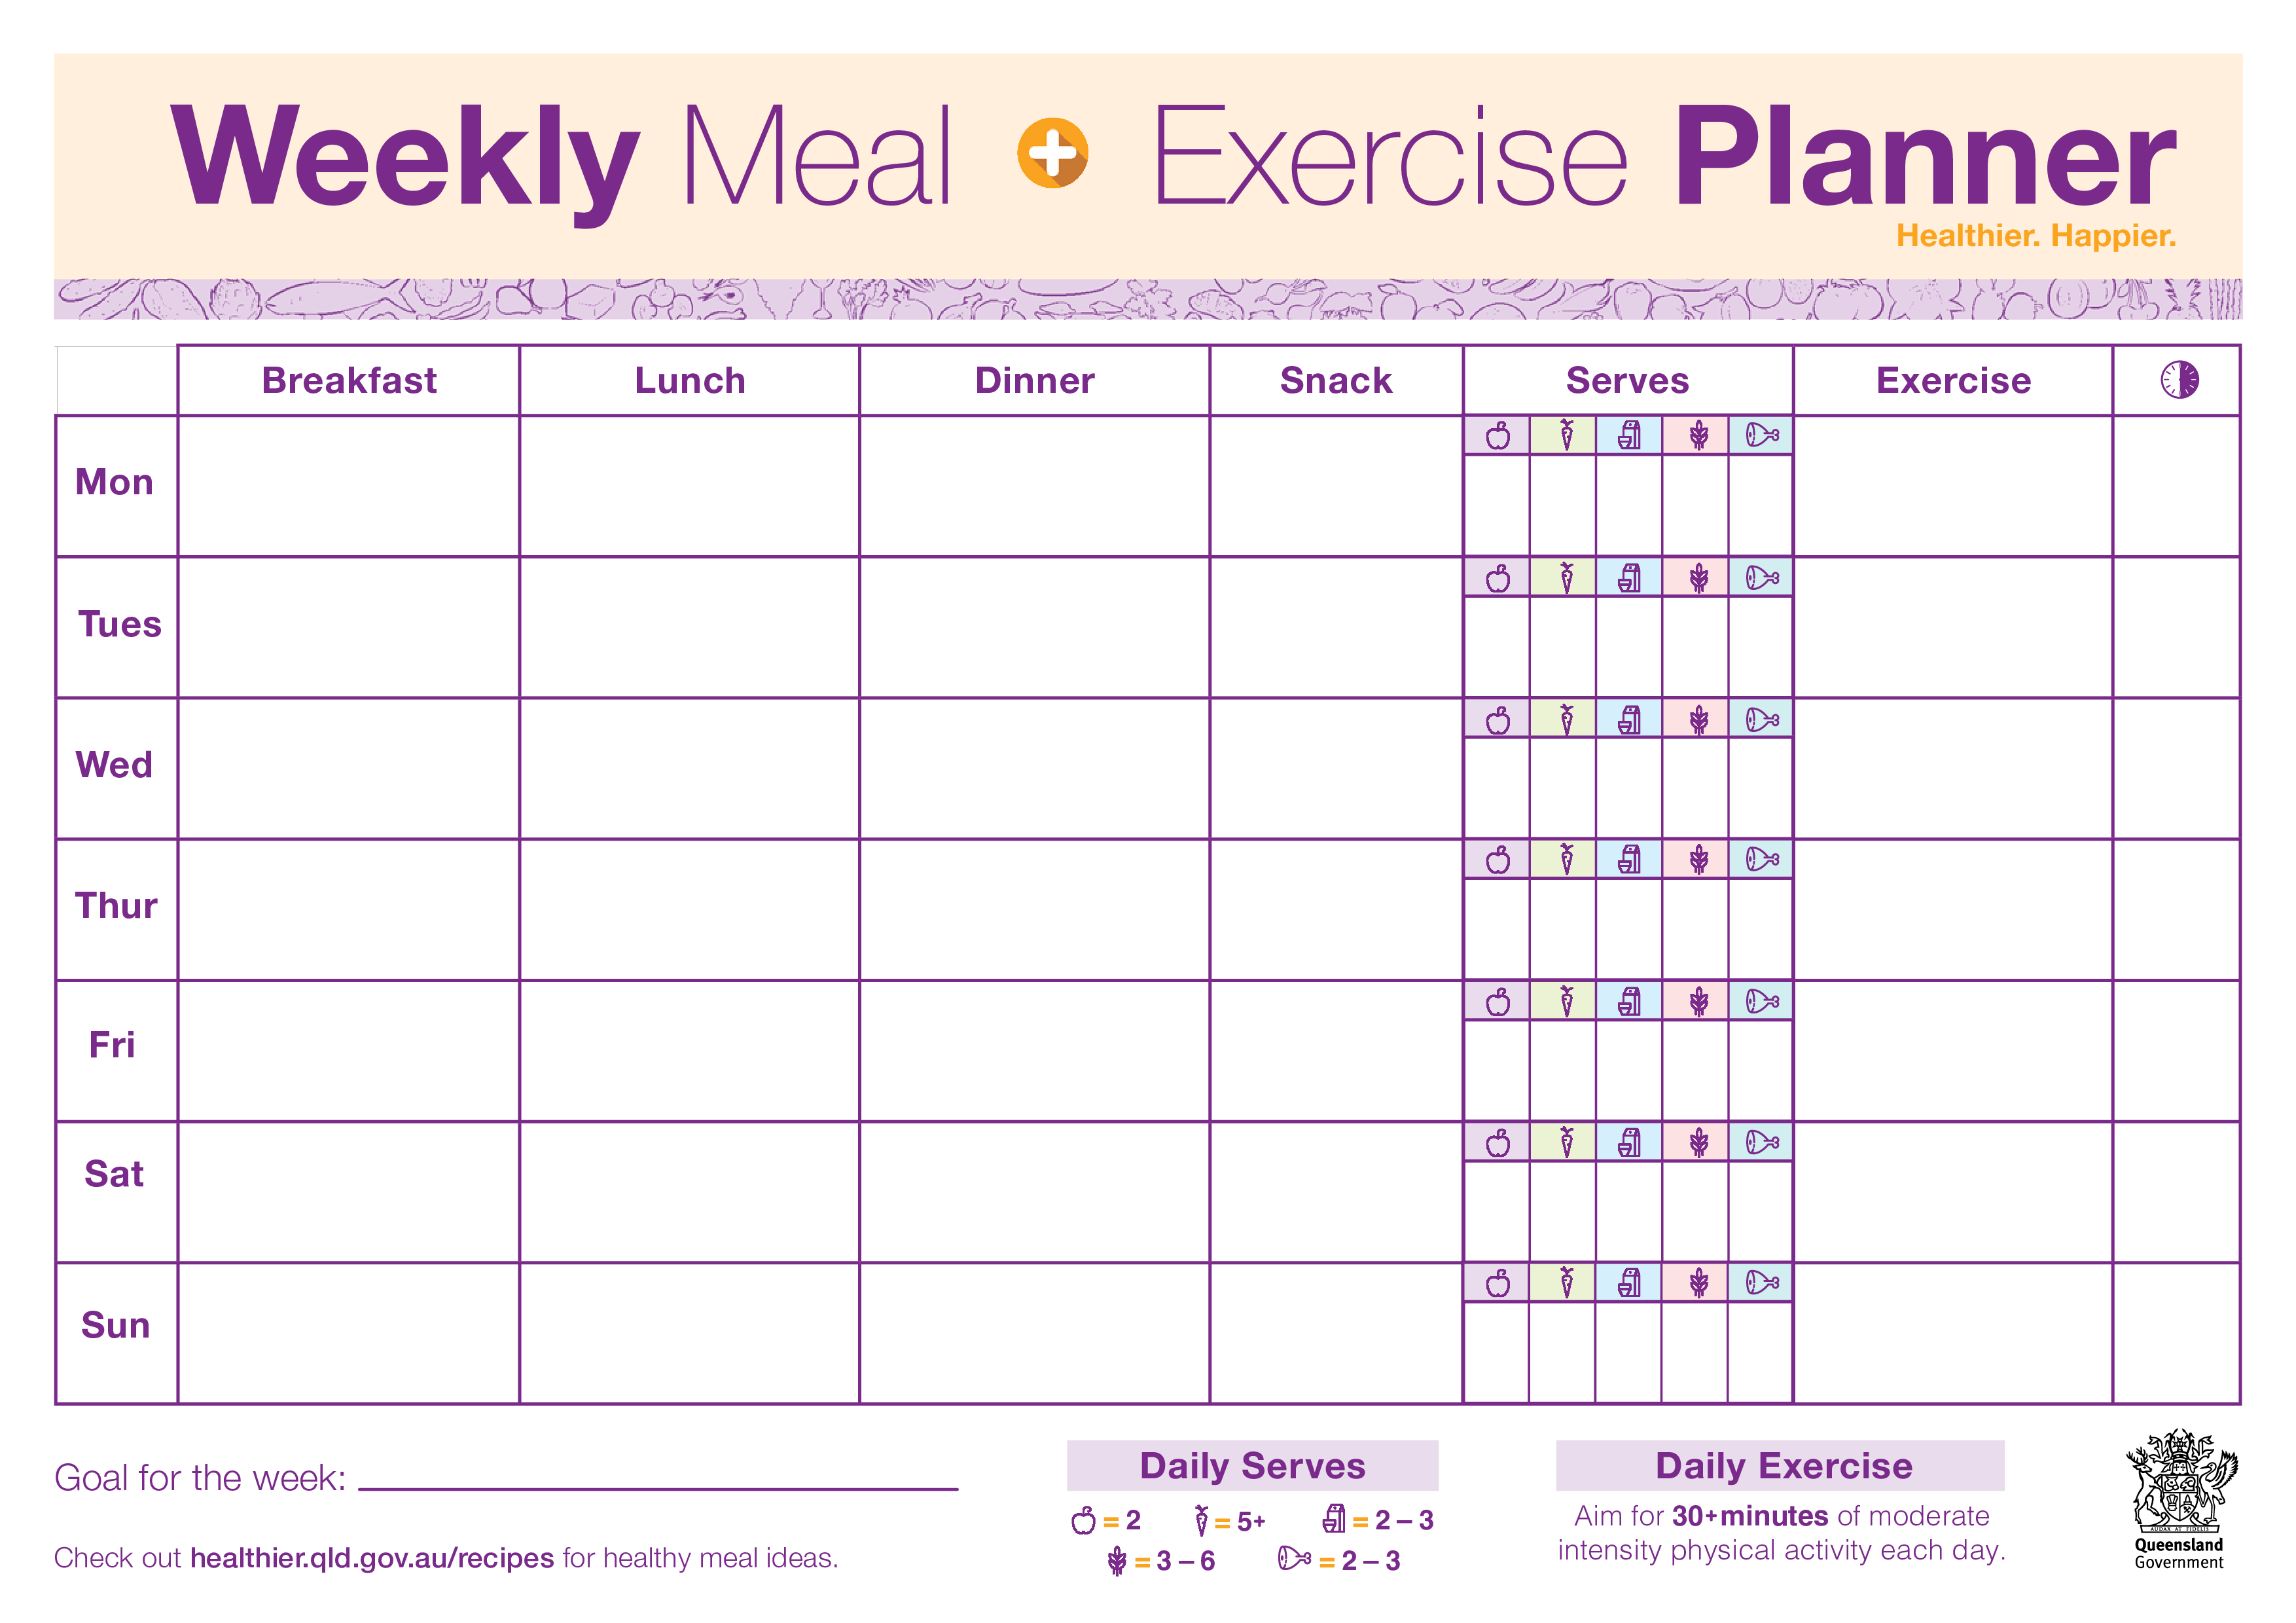 Weekly Meal Exercise Planner main image